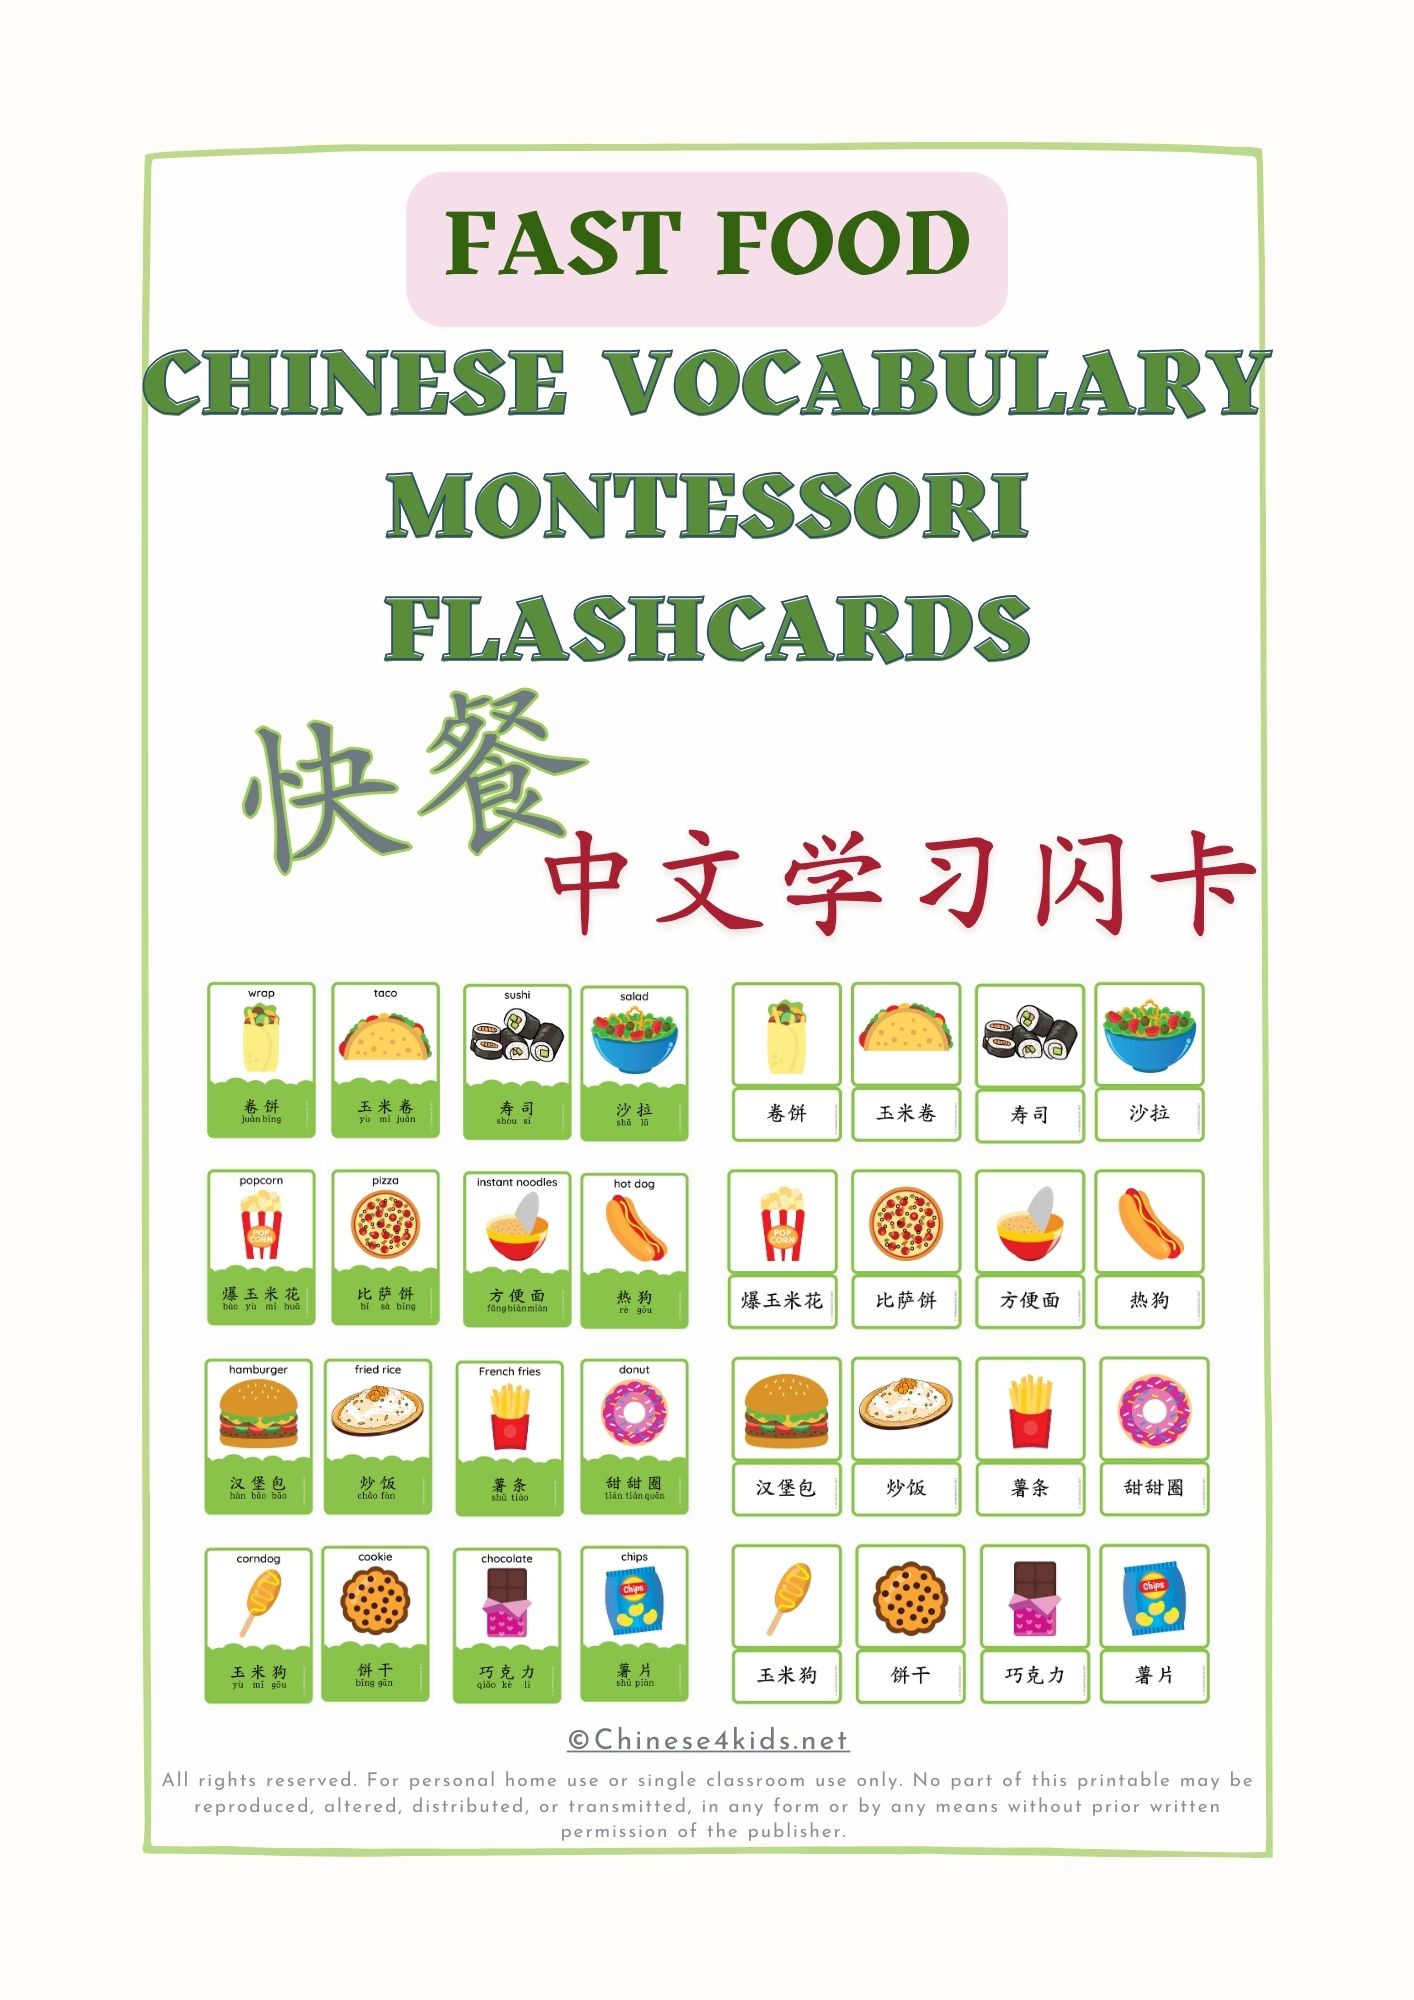 Fast Food Chinese vocabulary Montessori 3-part flashcards for kids and Chinese beginning learners #easyChinese #Chineseforkids #learnChinese #Chinesevocabulary #fastfoodChinesewords #Chinesevocab #Mandarin #Chineselanguage #worldlanguage #printable #downloadable #快餐单词